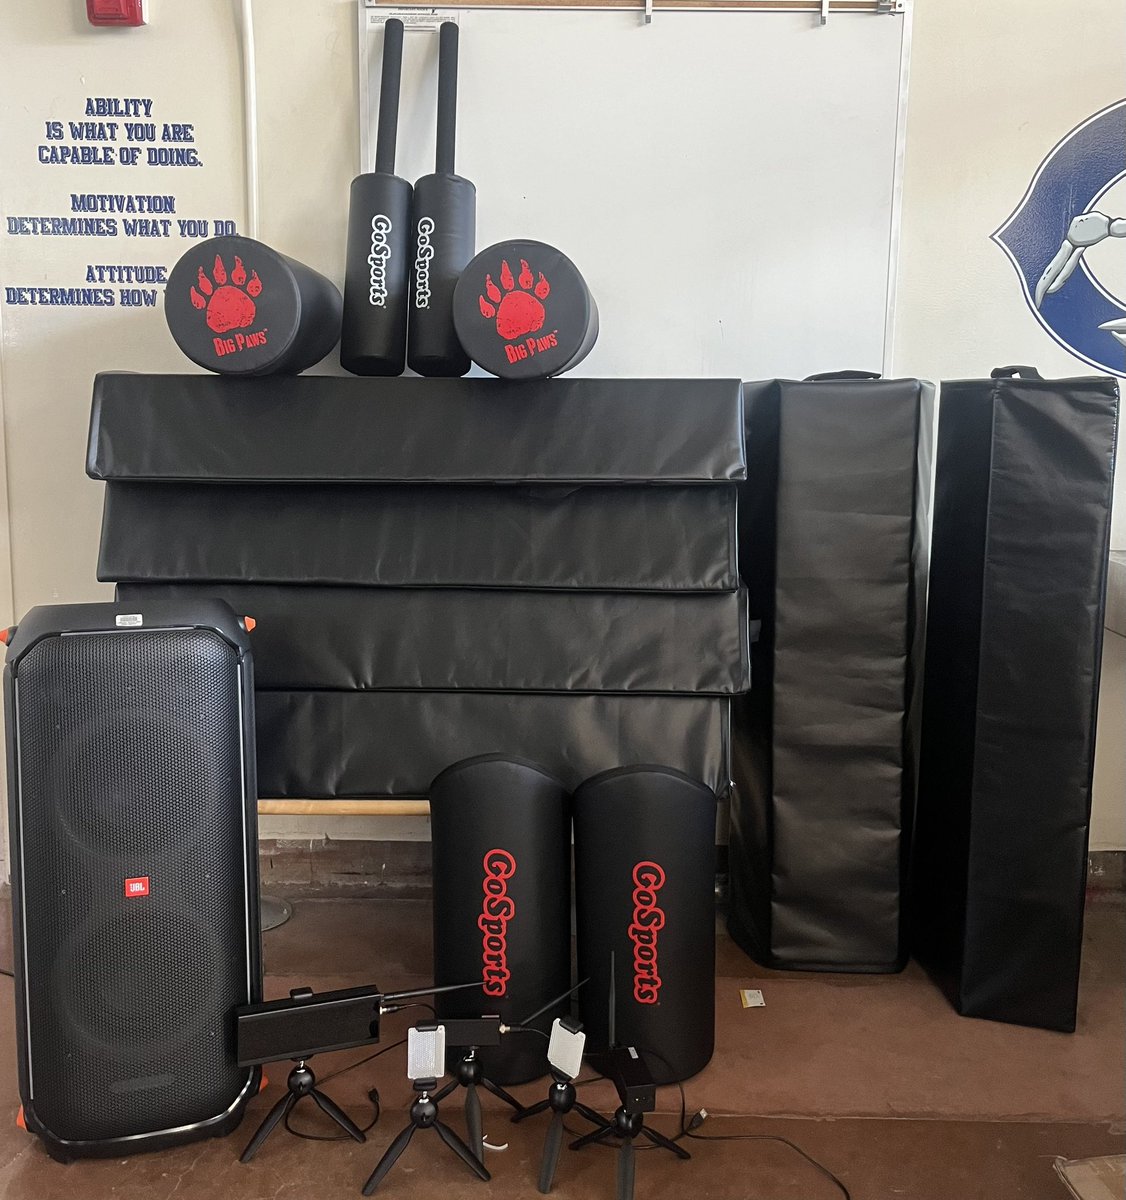 Huge shoutout and appreciation to our Scorpion Athletic Booster Club (@ScorpAthleticBC) for their Legacy VI contribution towards the Scorpion Football program. We were able to acquire some much needed upgrades to our practice equipment! #GoScorps #Character #Commitment #Unity